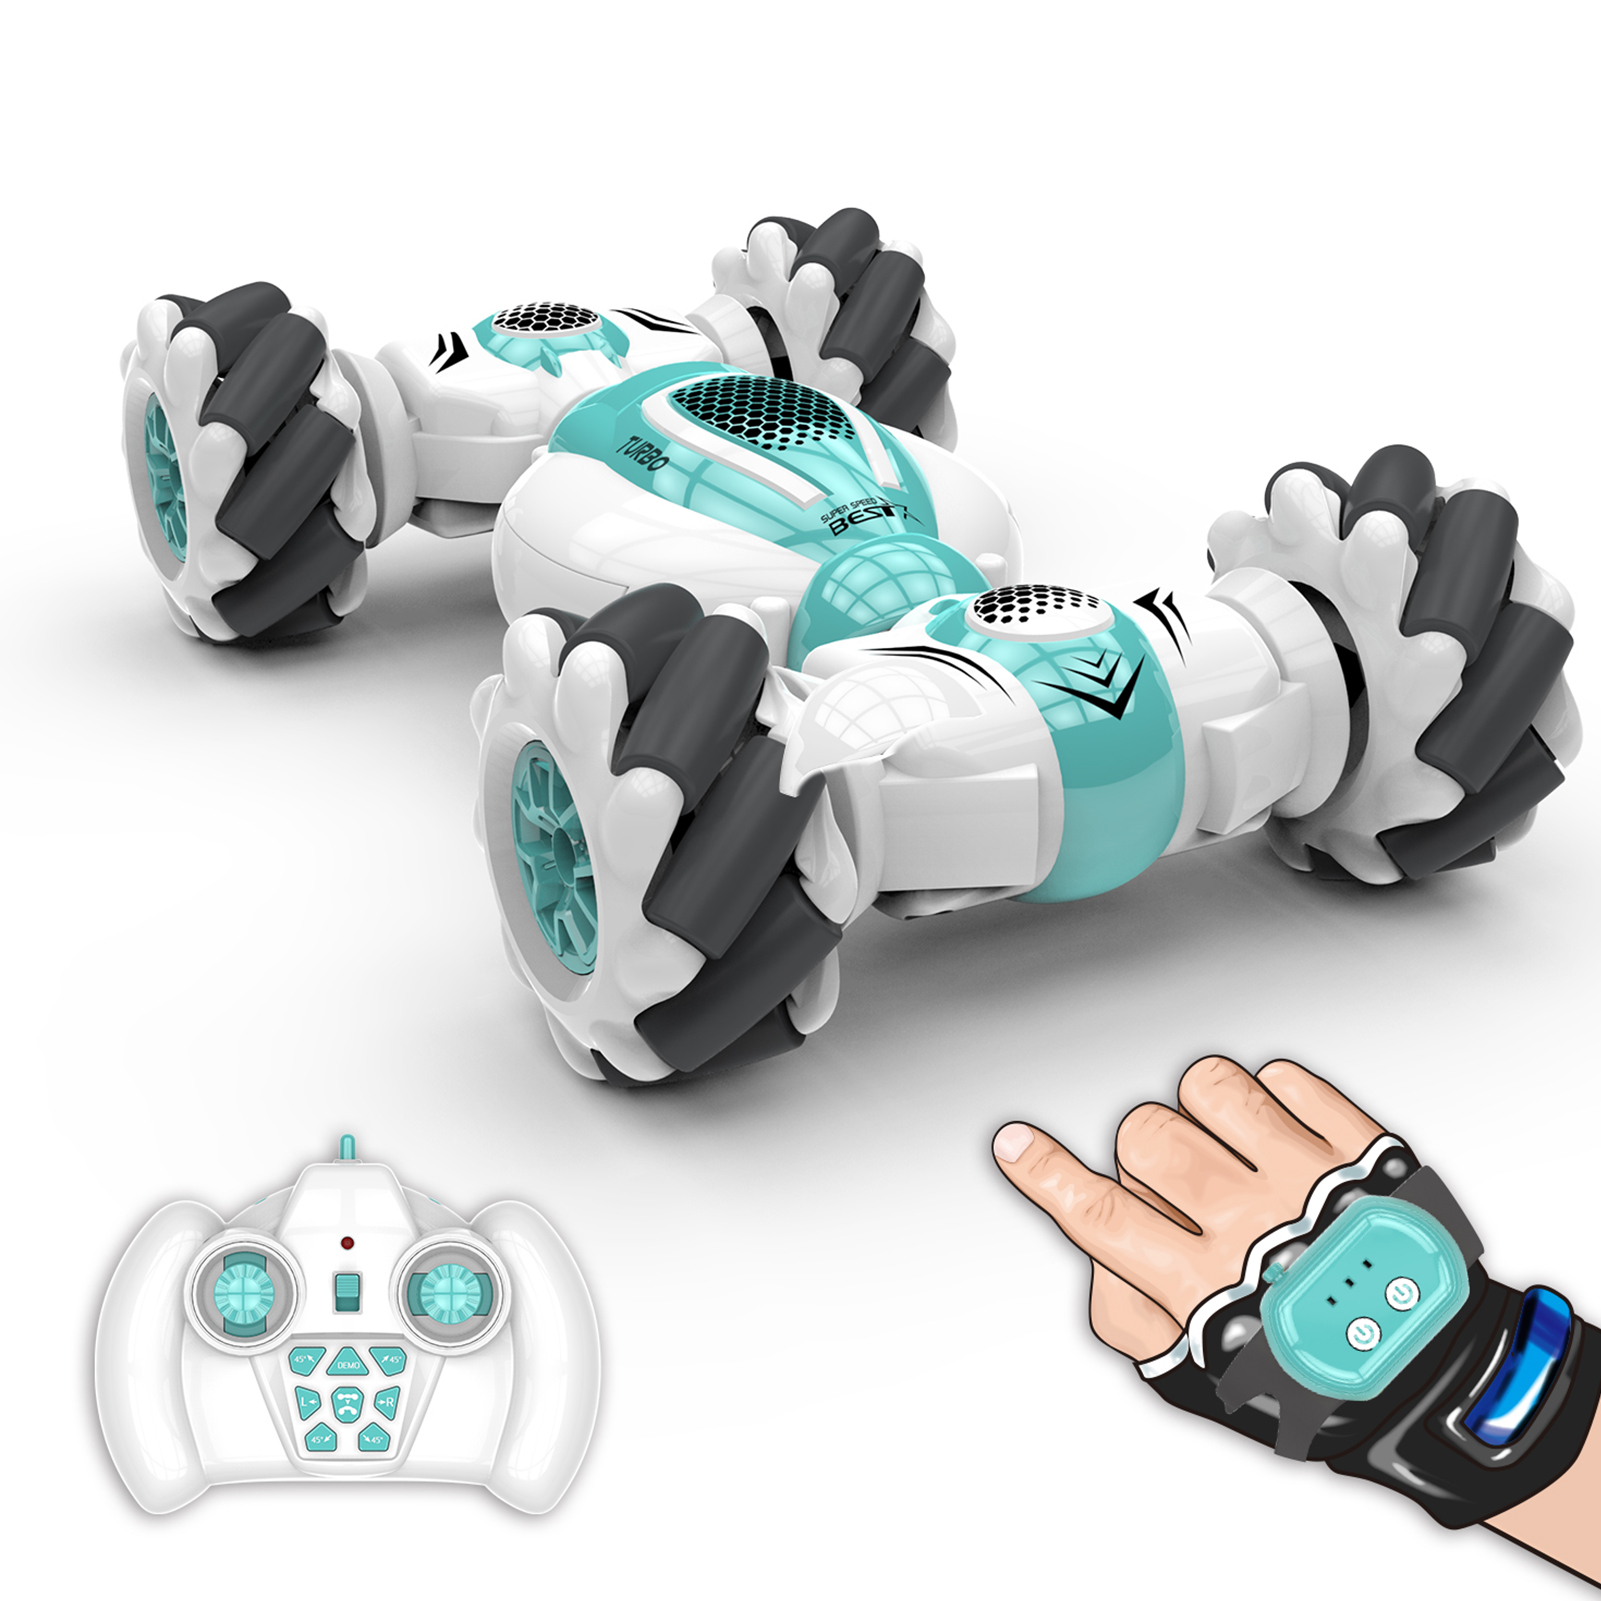 

S-012 RC Stunt Car Remote Control Watch Gesture Sensor Electric Toy Cars 2.4GHz 4WD Rotation Gift for Kids Boys Birthday